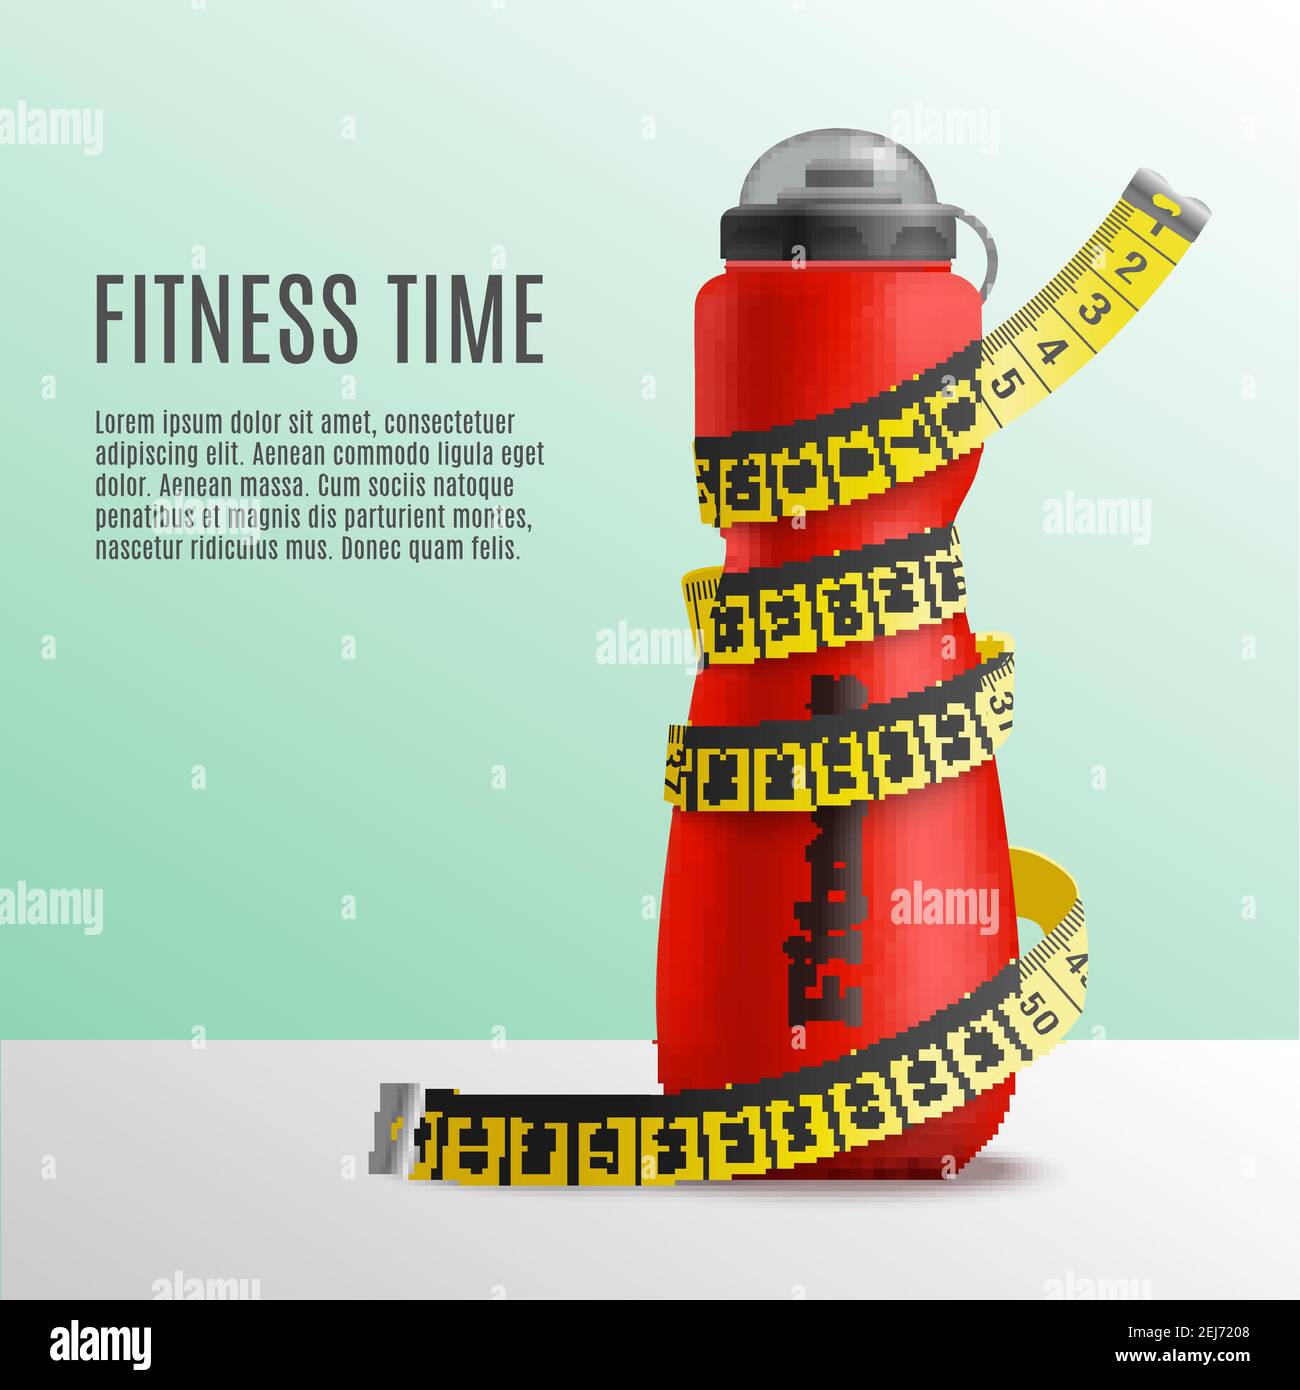 Fitness bottle tape realistic composition with editable text and image of bottle wrapped up in metre stick vector illustration Stock Vector